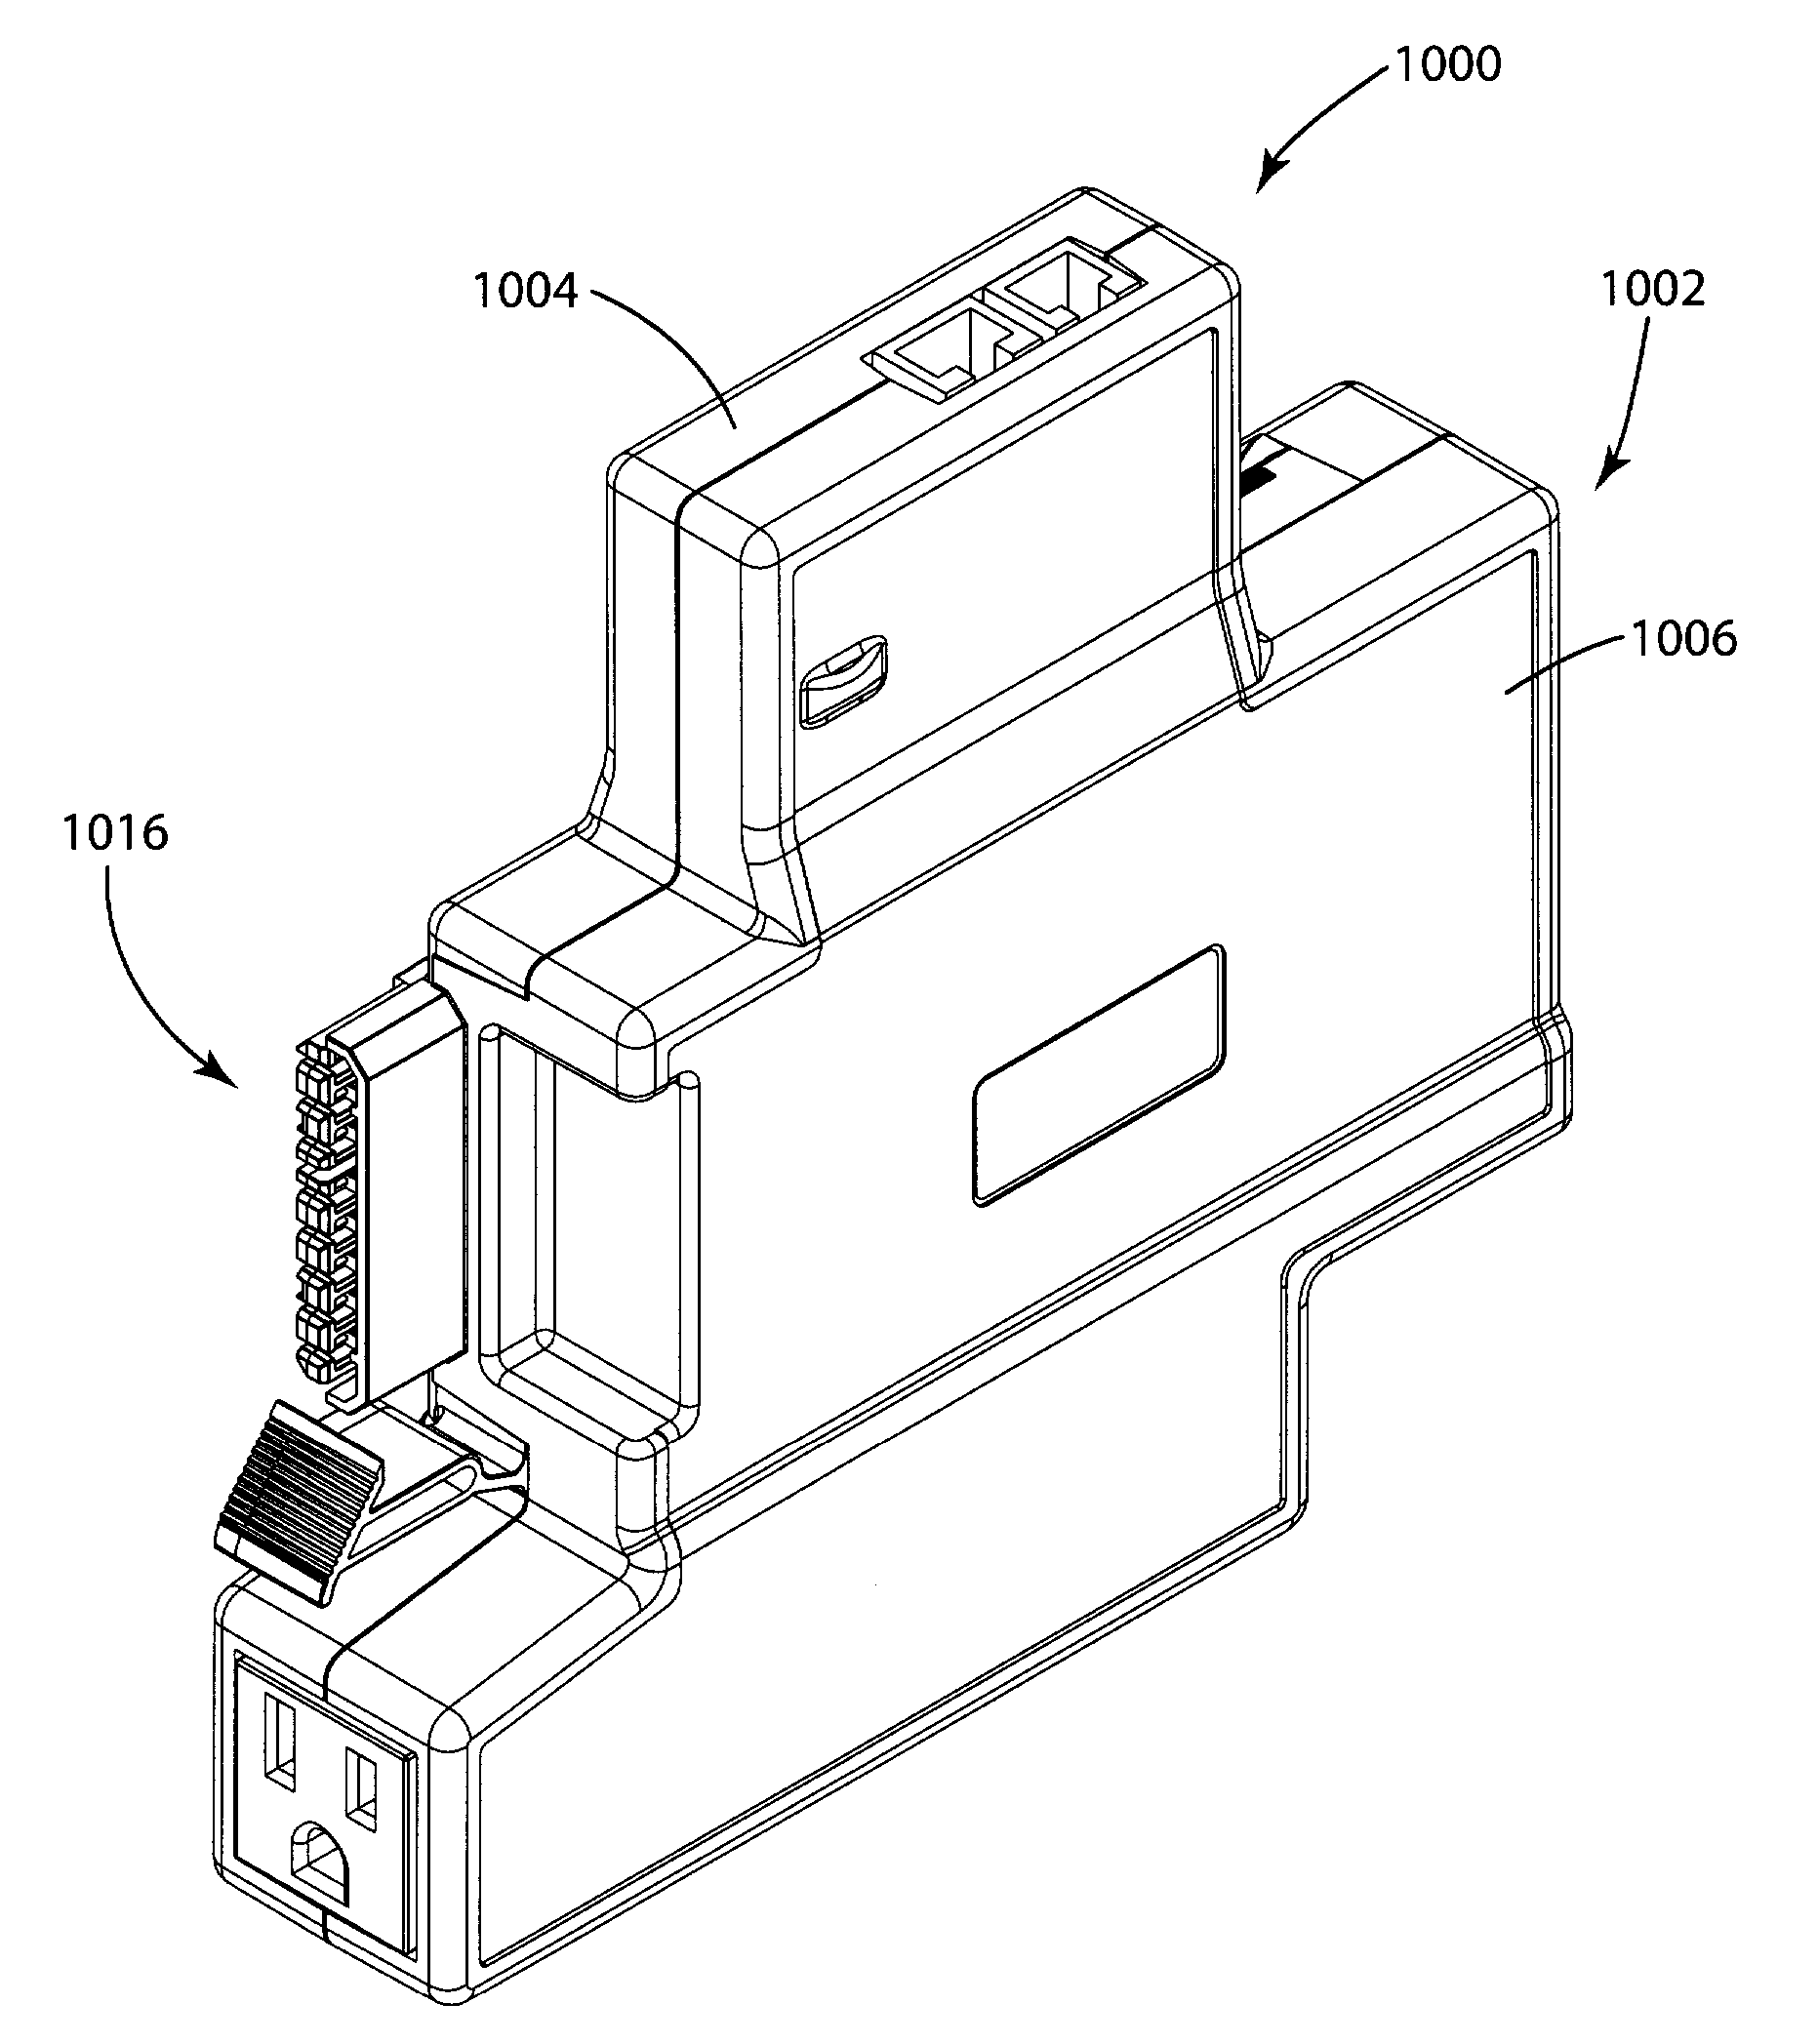 Modules for interconnection of sensors, actuators and application devices